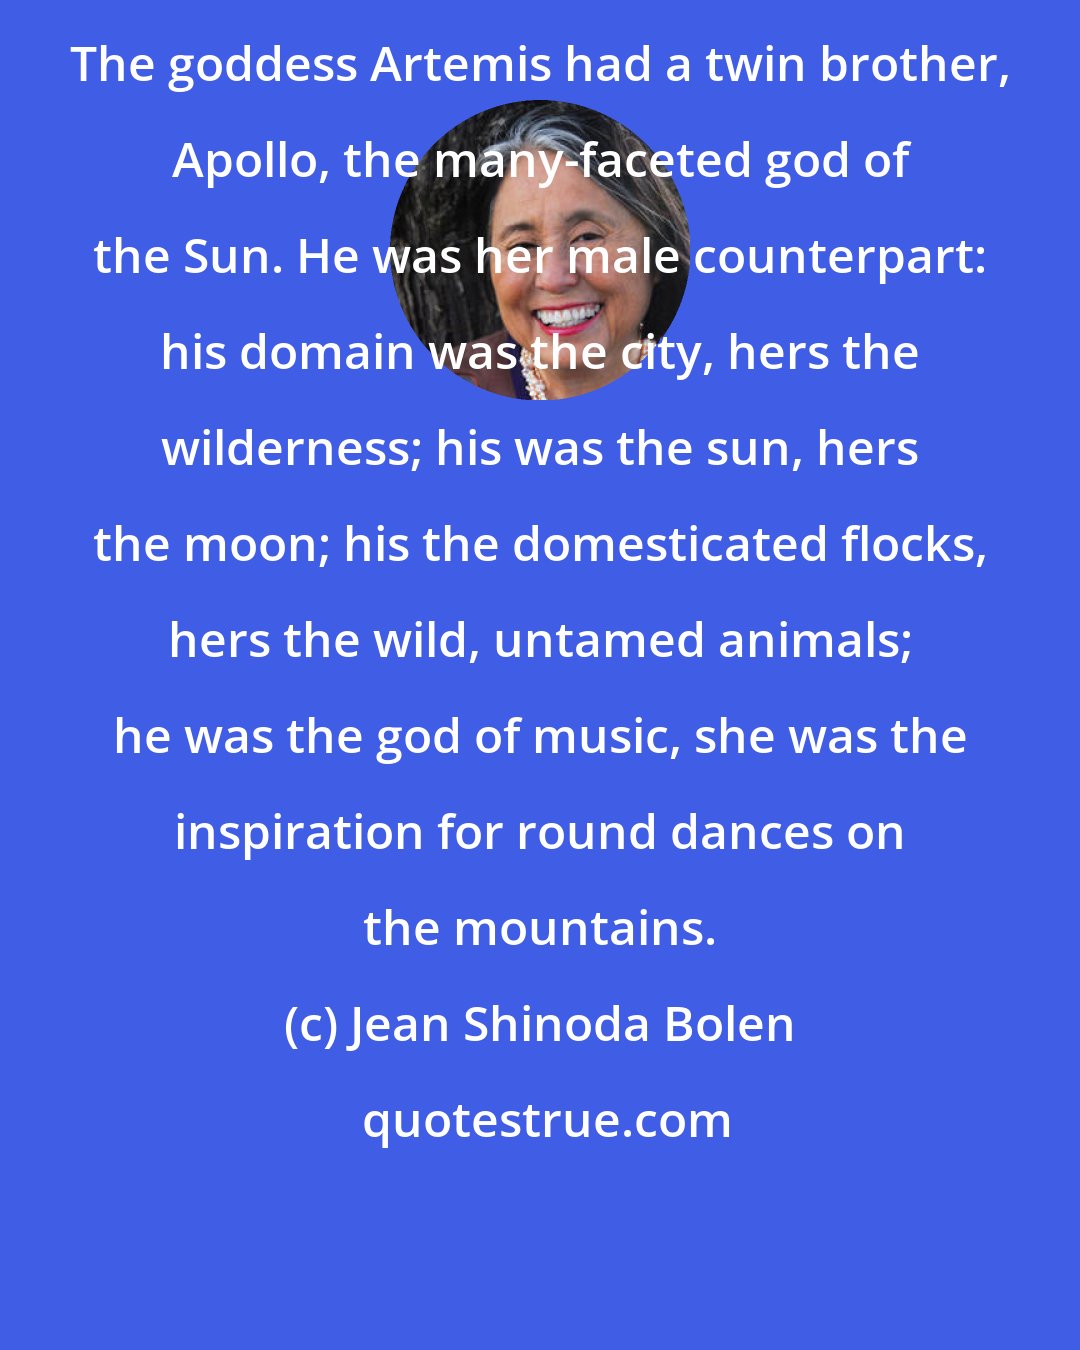 Jean Shinoda Bolen: The goddess Artemis had a twin brother, Apollo, the many-faceted god of the Sun. He was her male counterpart: his domain was the city, hers the wilderness; his was the sun, hers the moon; his the domesticated flocks, hers the wild, untamed animals; he was the god of music, she was the inspiration for round dances on the mountains.